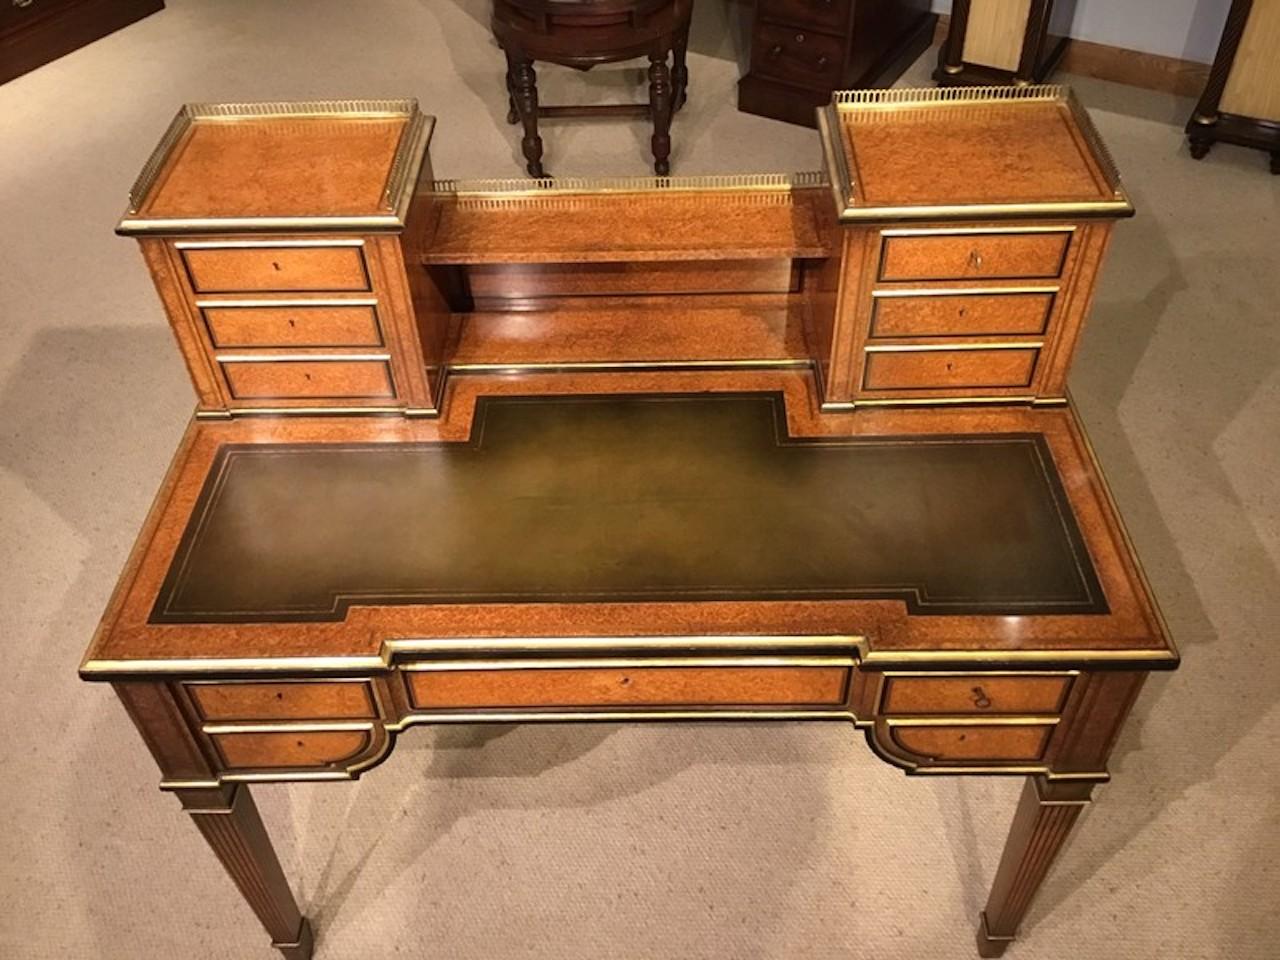 A rare amboyna, parcel gilt and ebony Victorian Period antique writing desk. Having a raised super structure with a brass gallery with six rectangular mahogany lined drawers and a shelf, veneered in the finest amboyna with parcel gilt detail and